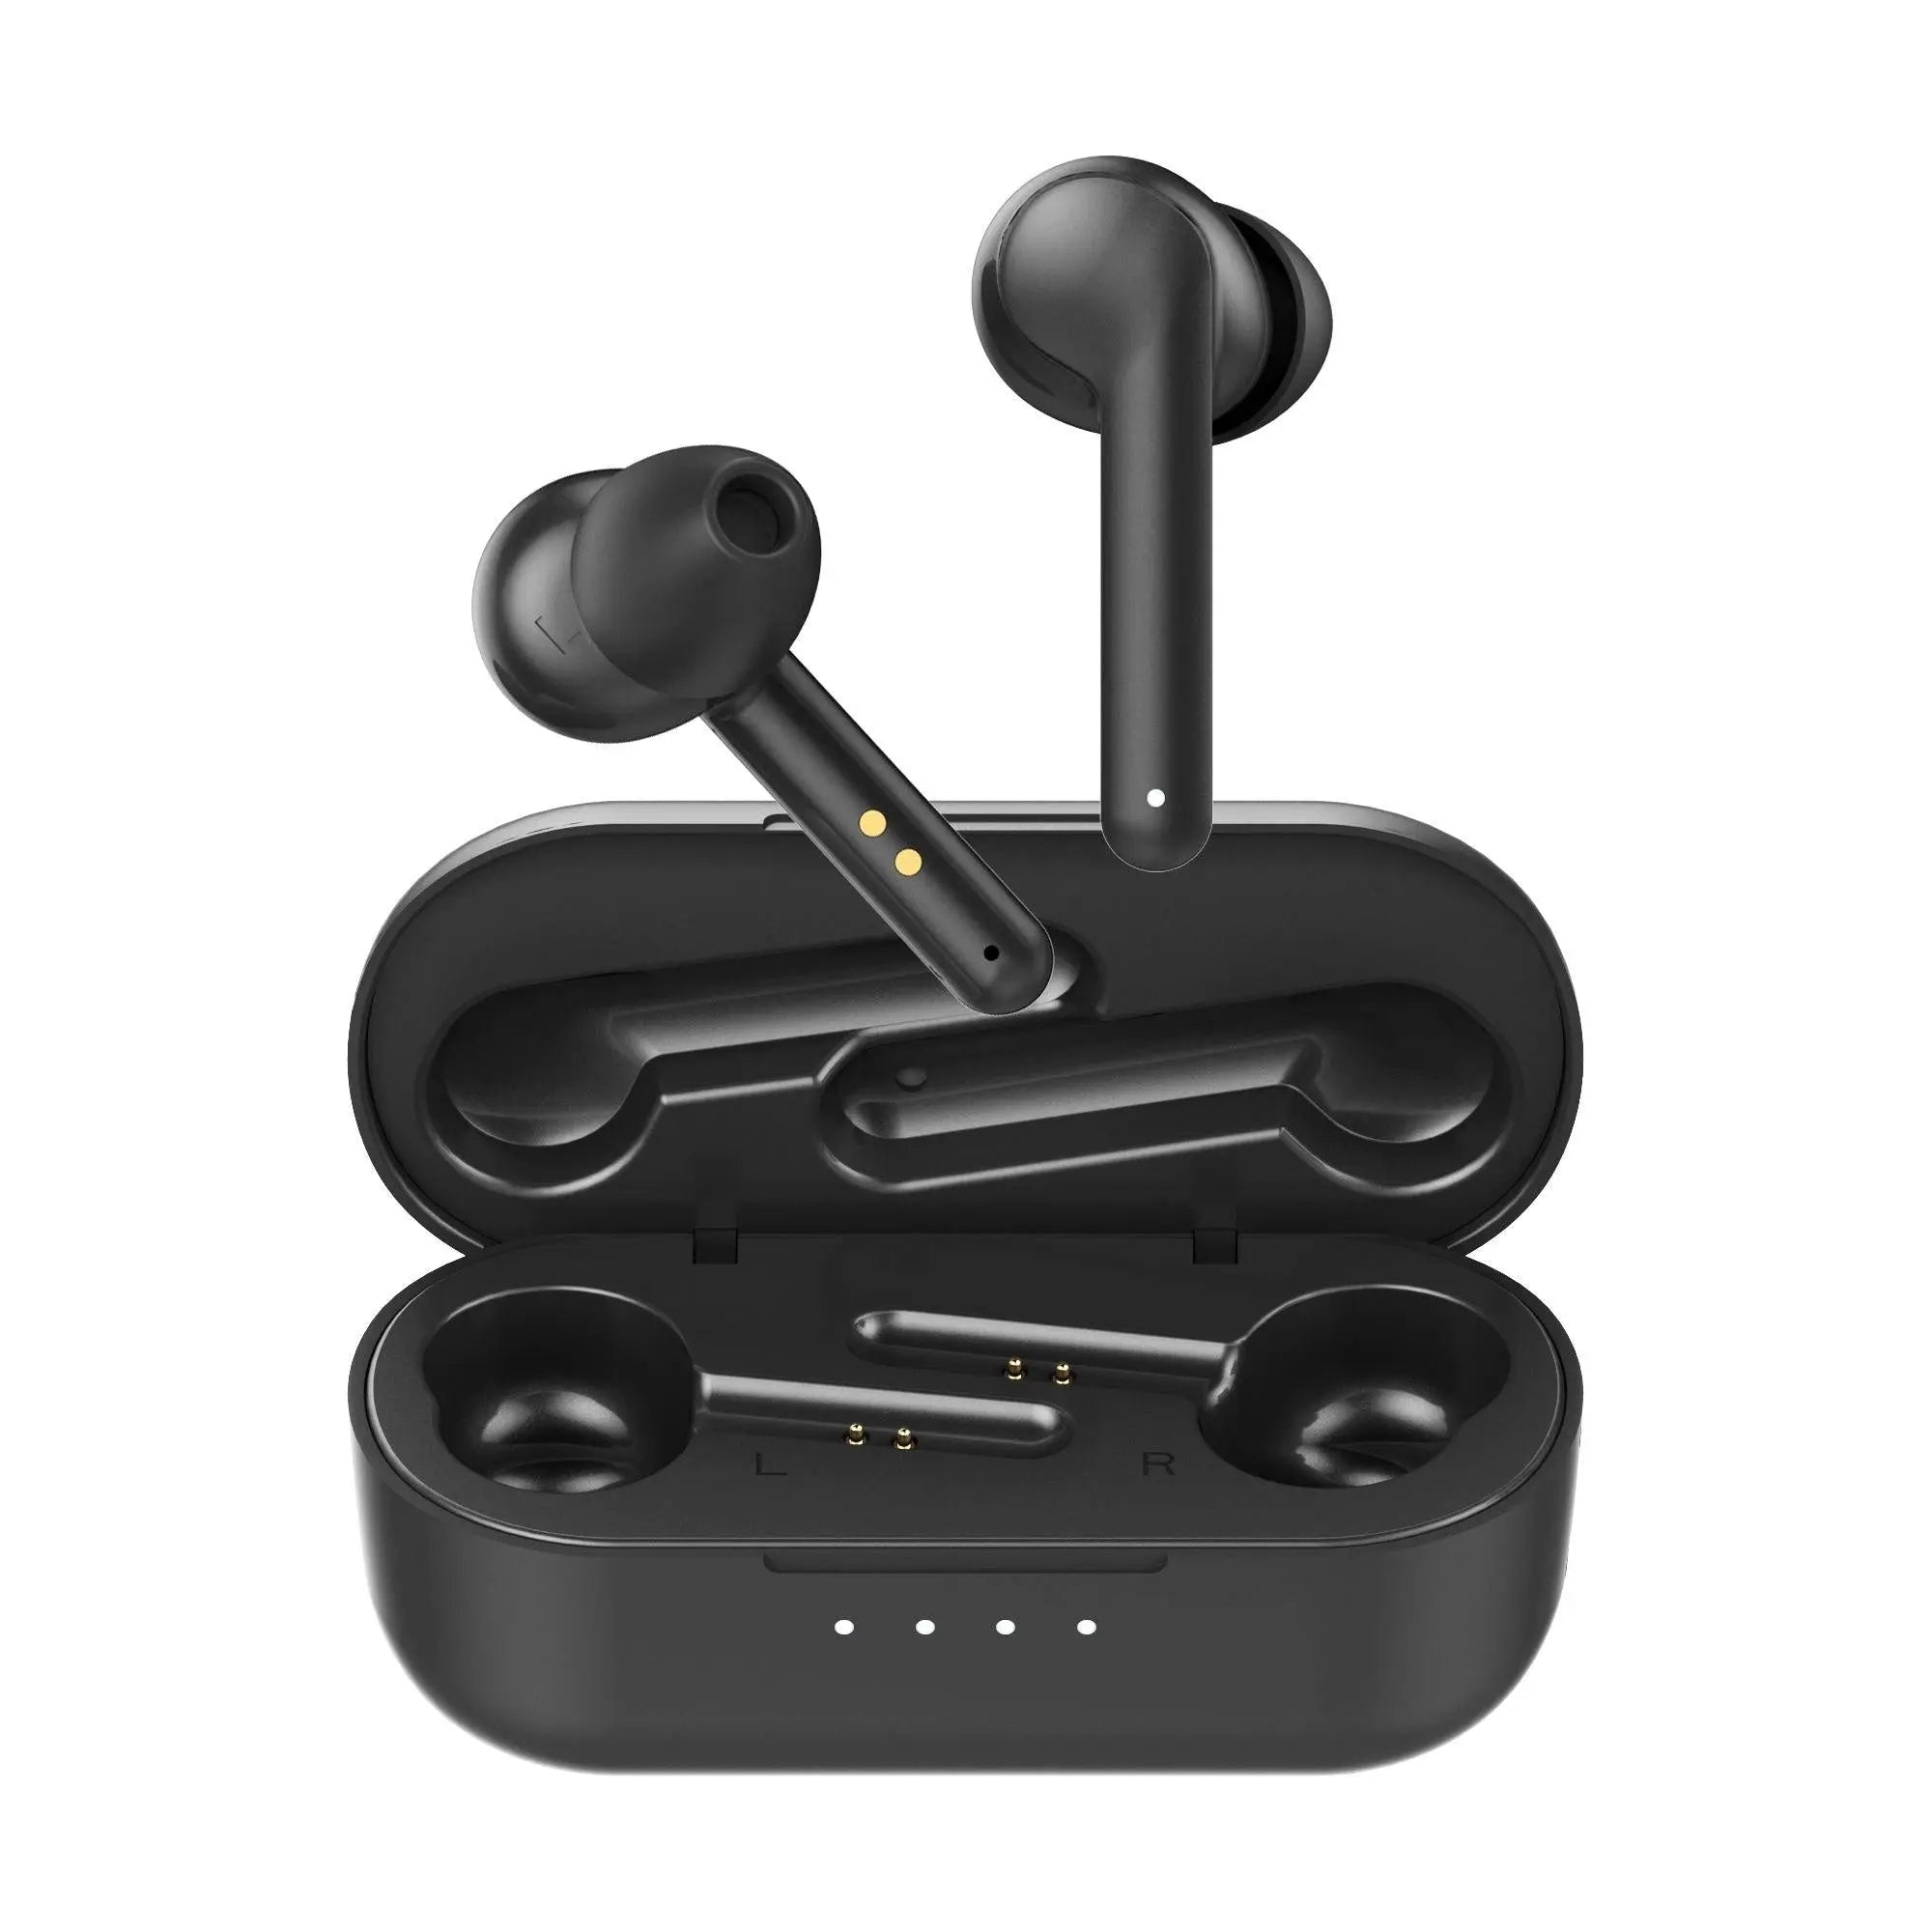 MBEAT E1 True Wireless Earbuds - Up to 4hr Play time, 14hr Charge Case, Easy Pair MBEAT